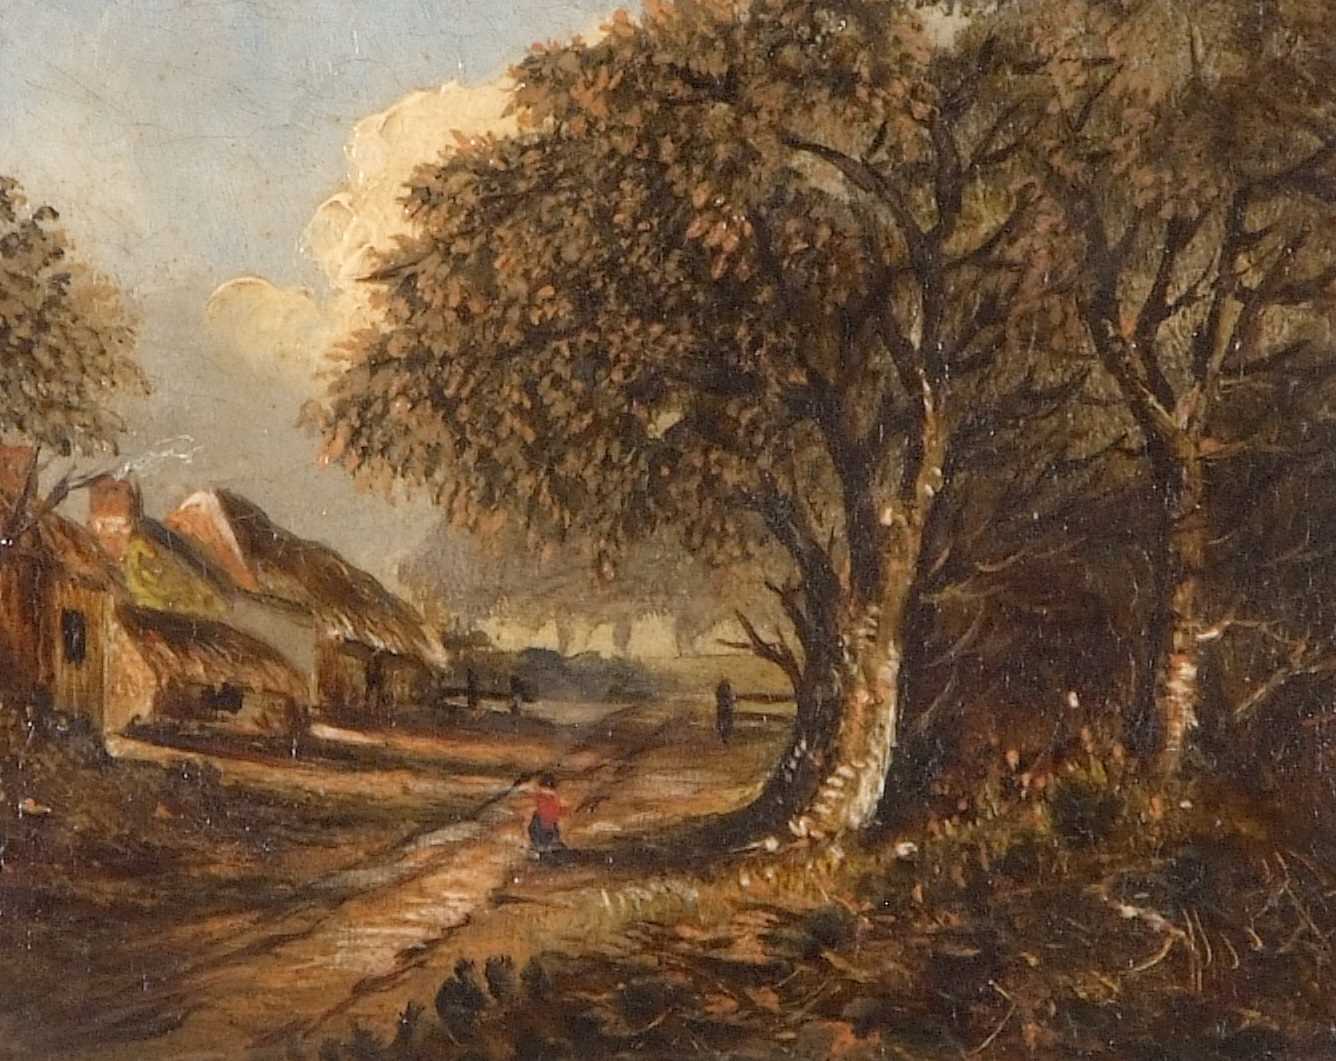 Obadiah Short (British,1803-1886, Norwich School), rural scene depicting a lone figure on a woodland - Image 2 of 2